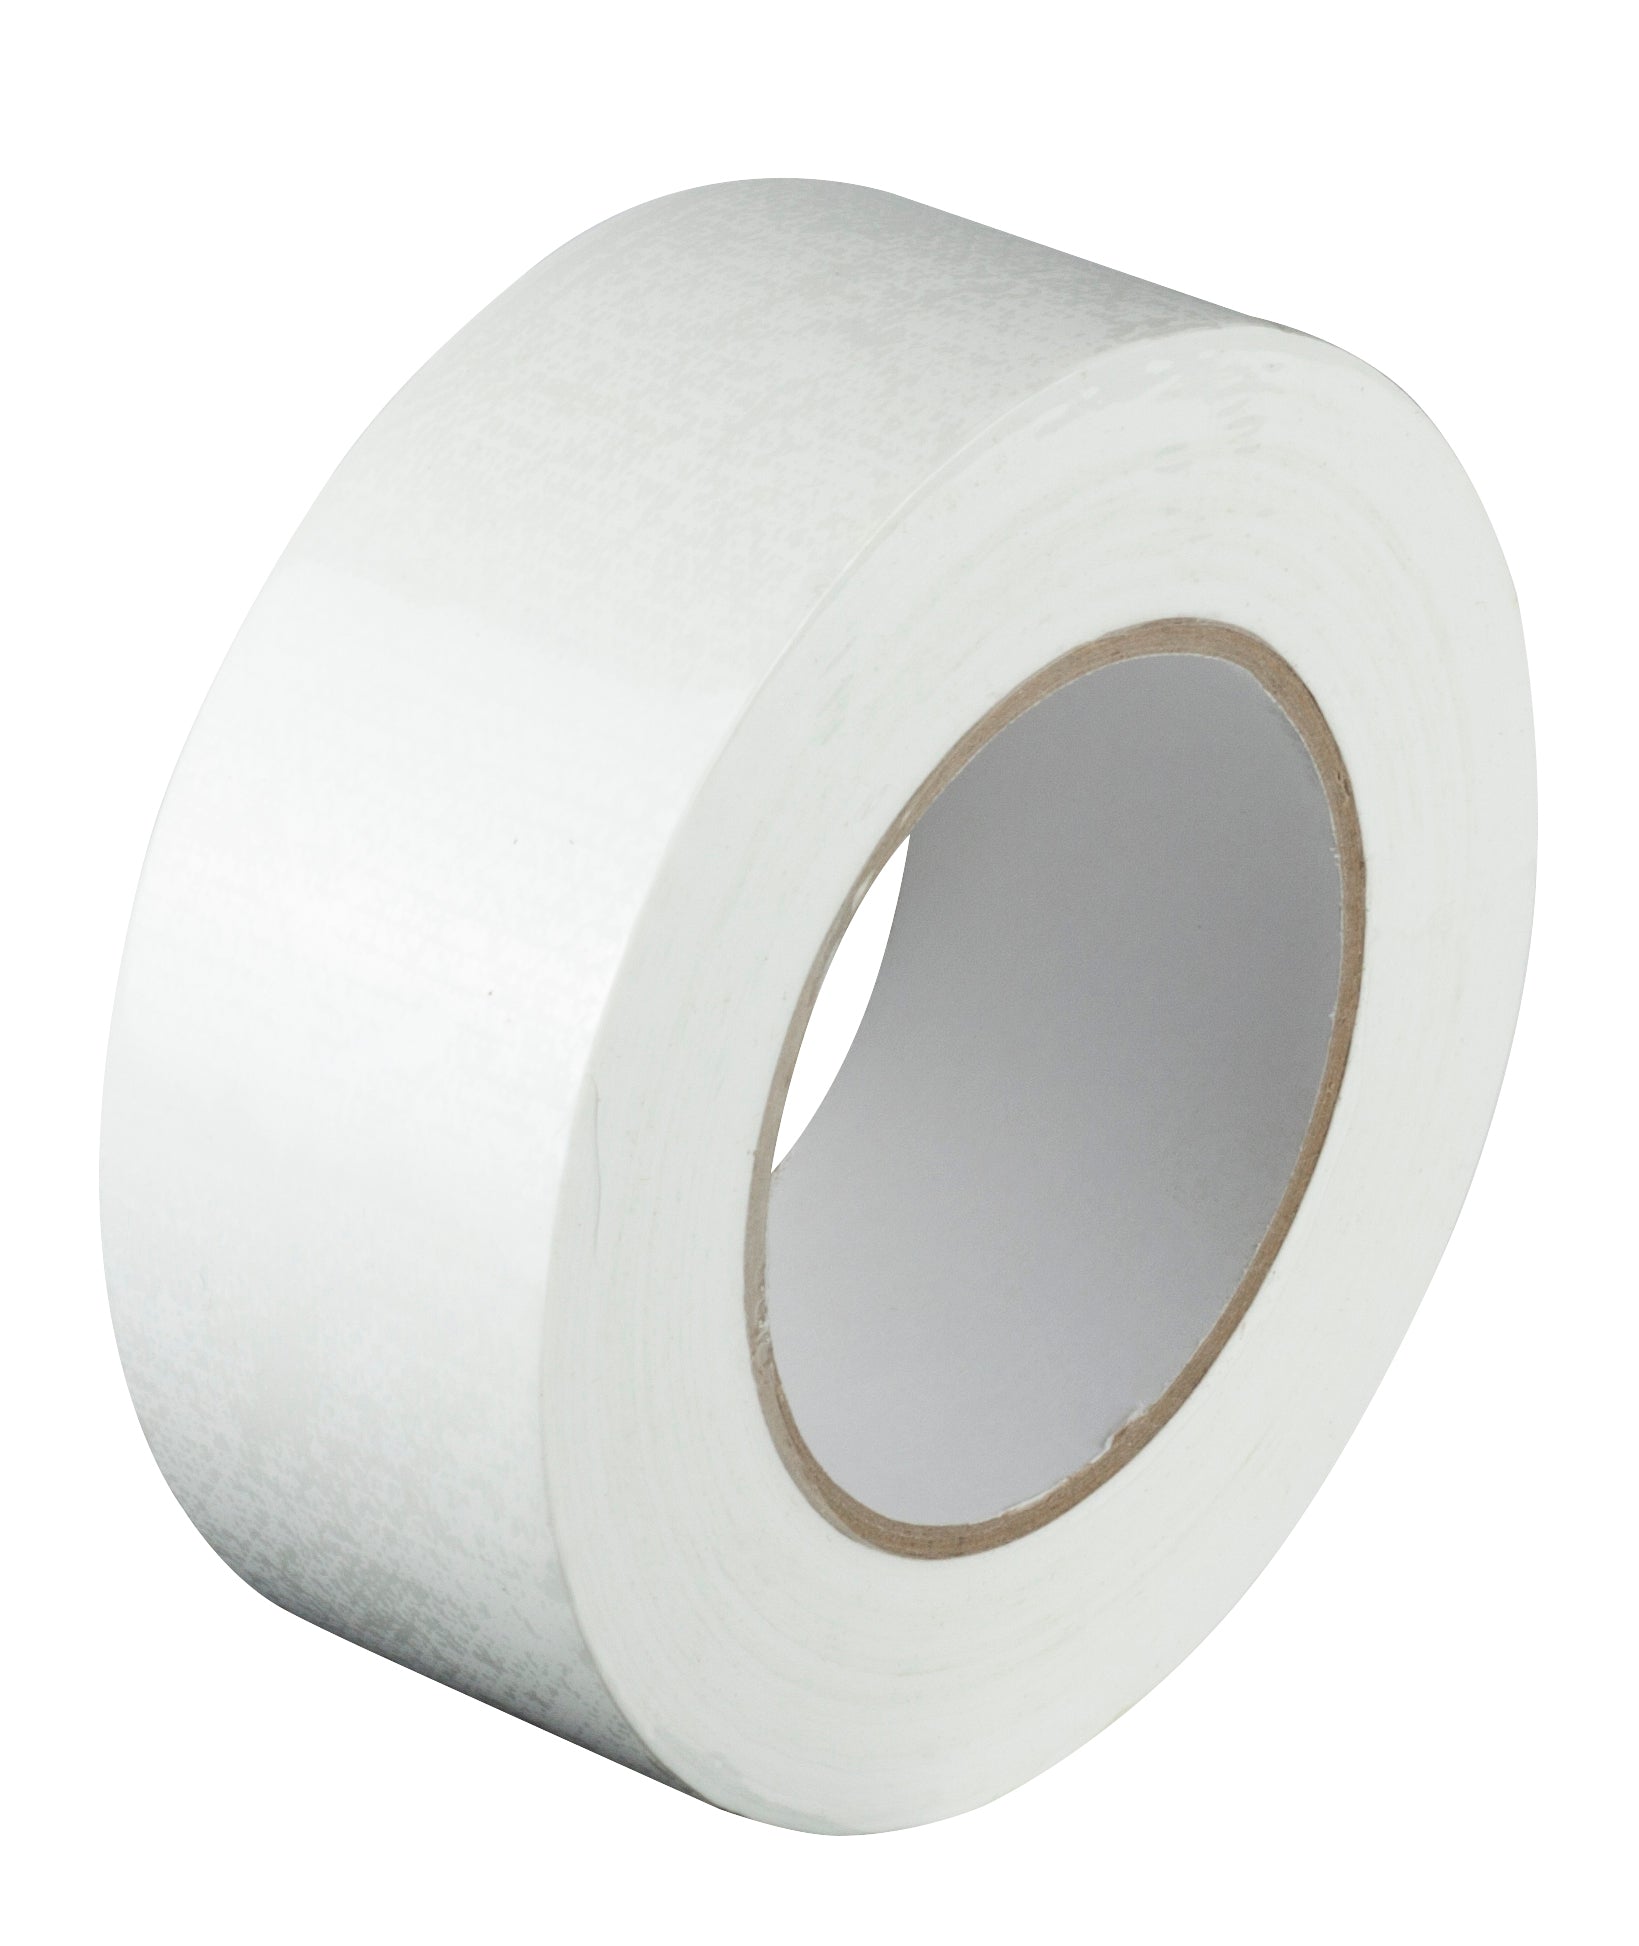 Gaffer/Duct Tape 100mm x 50m (WHITE) 50 Mesh 0.18mm Thickness  - Per Pack